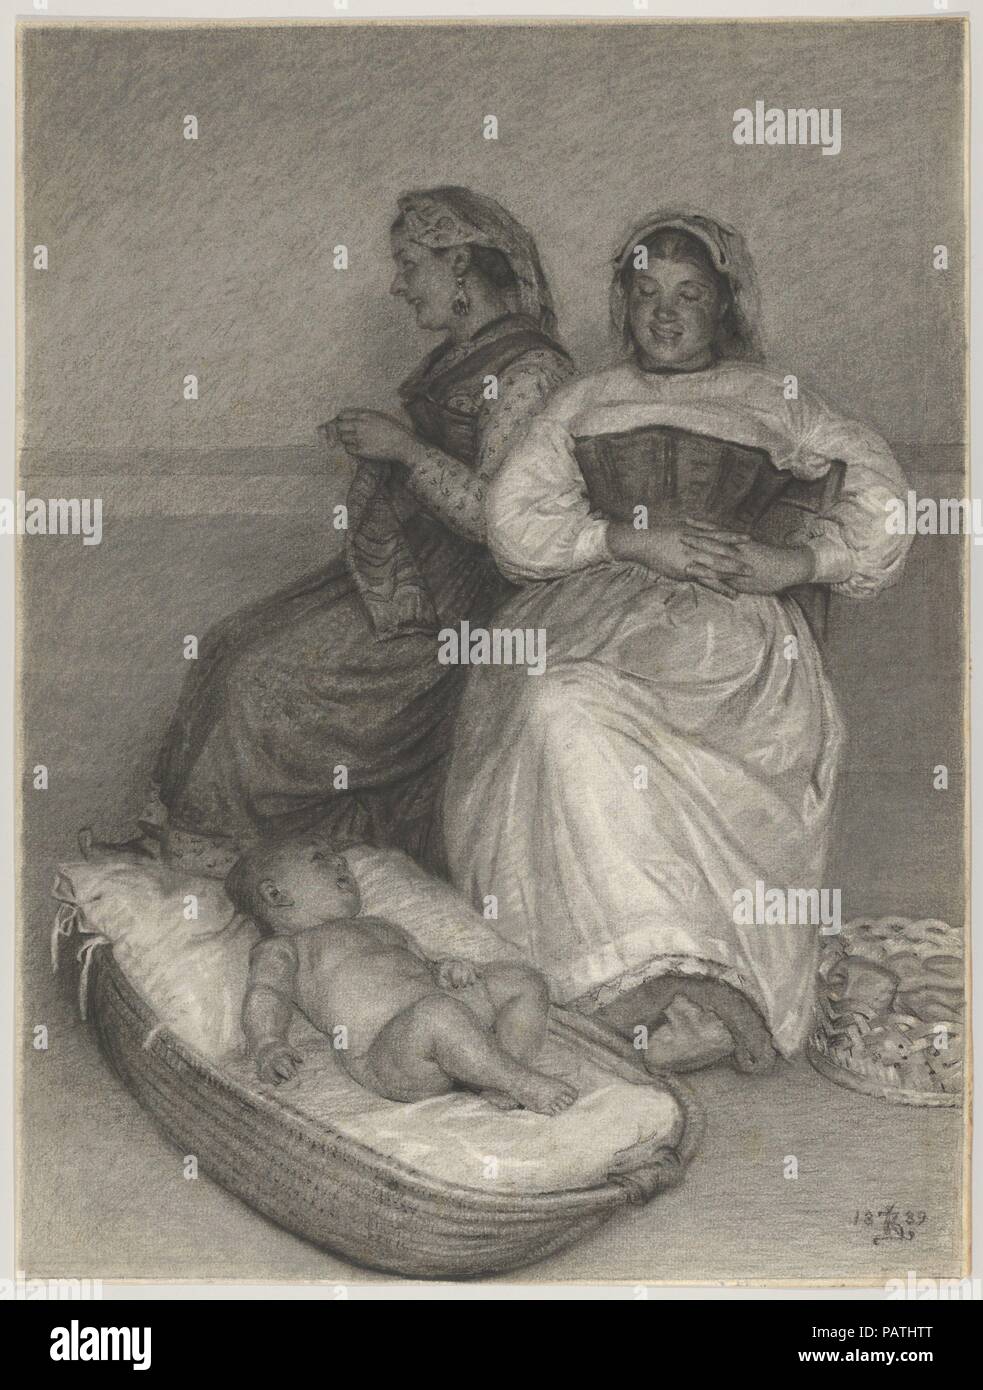 Two Seated Italian Women with a Baby in a Cradle. Artist: Kristian Zahrtmann (Danish, Rønne 1834-1912 Frederiksberg). Dimensions: Sheet: 17 3/8 × 13 1/8 in. (44.2 × 33.4 cm). Date: 1889. Museum: Metropolitan Museum of Art, New York, USA. Stock Photo